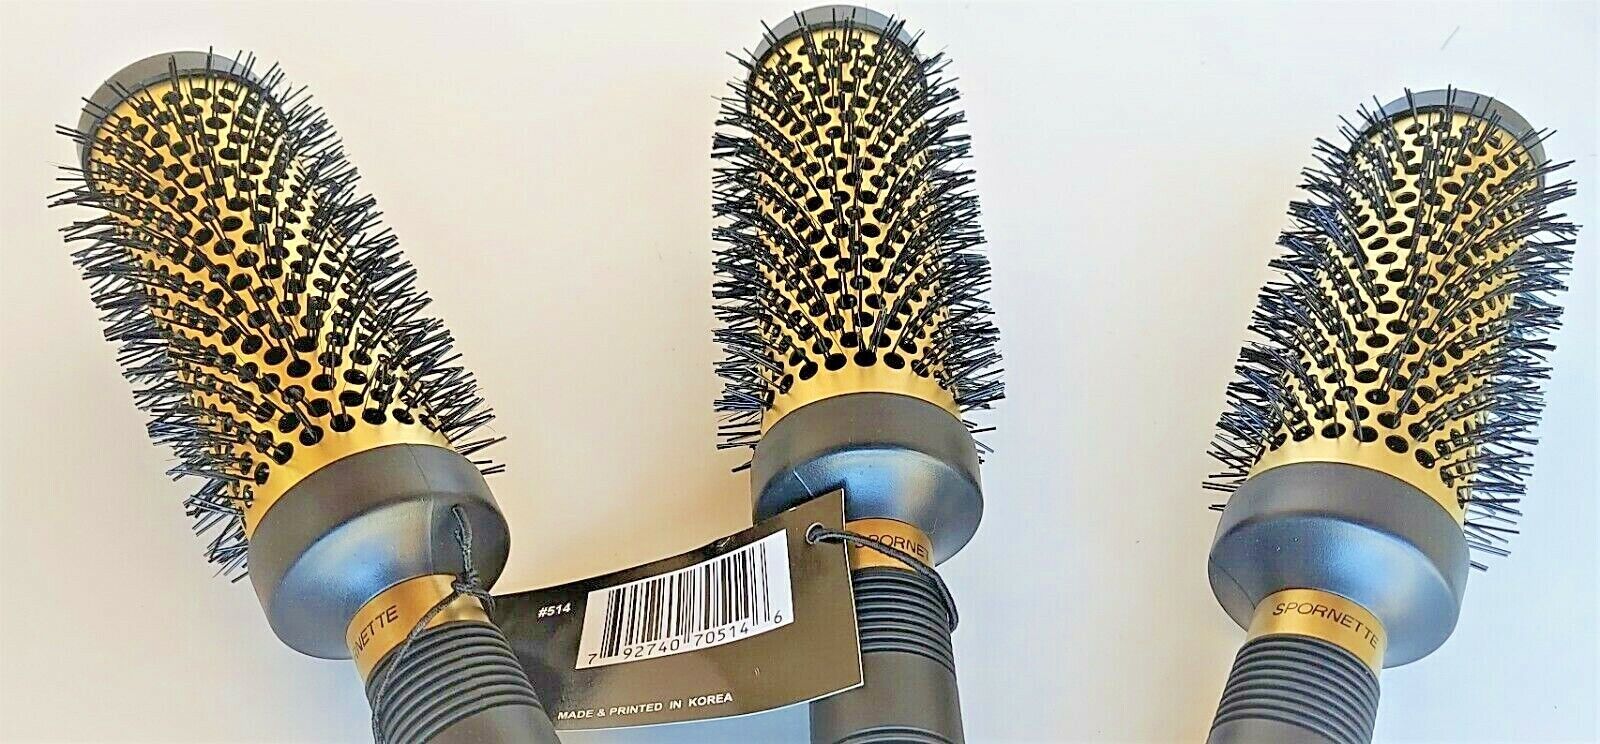 Spornette Gold Aerated Aerators Hair FREE Max 69% OFF Selling and selling Brush #514 -- SHIPP